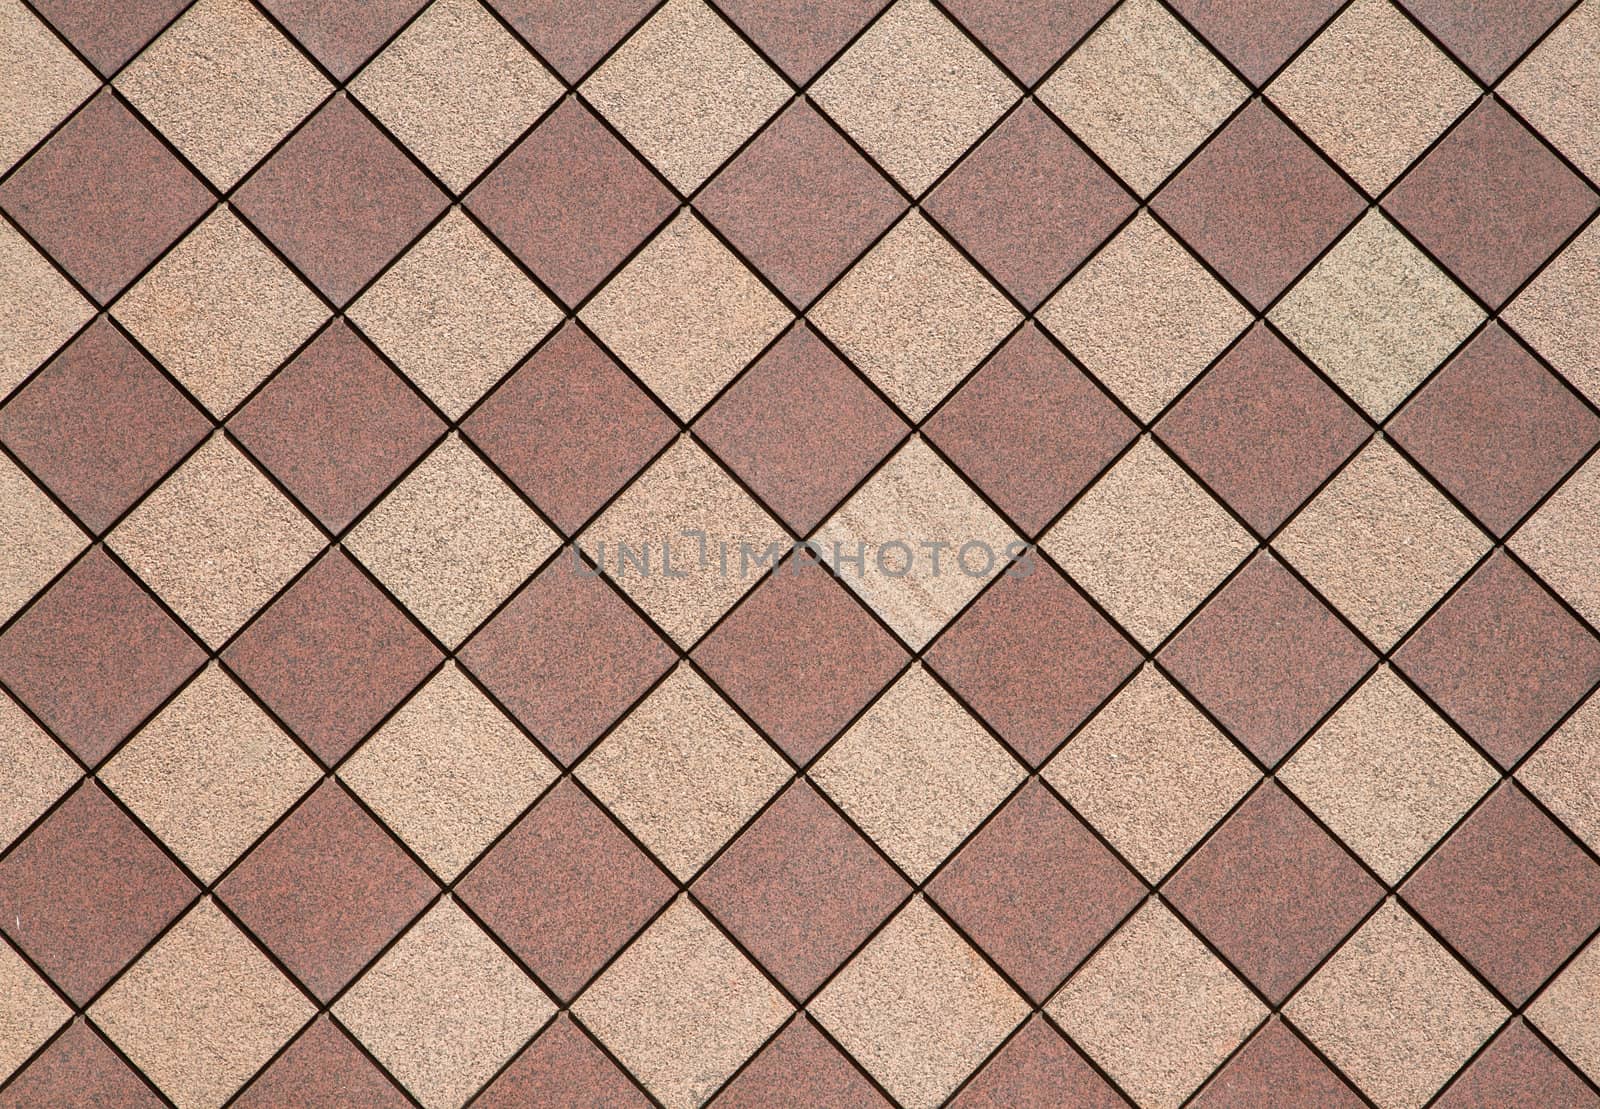 Brown and tan checkered wall in a horizontal image